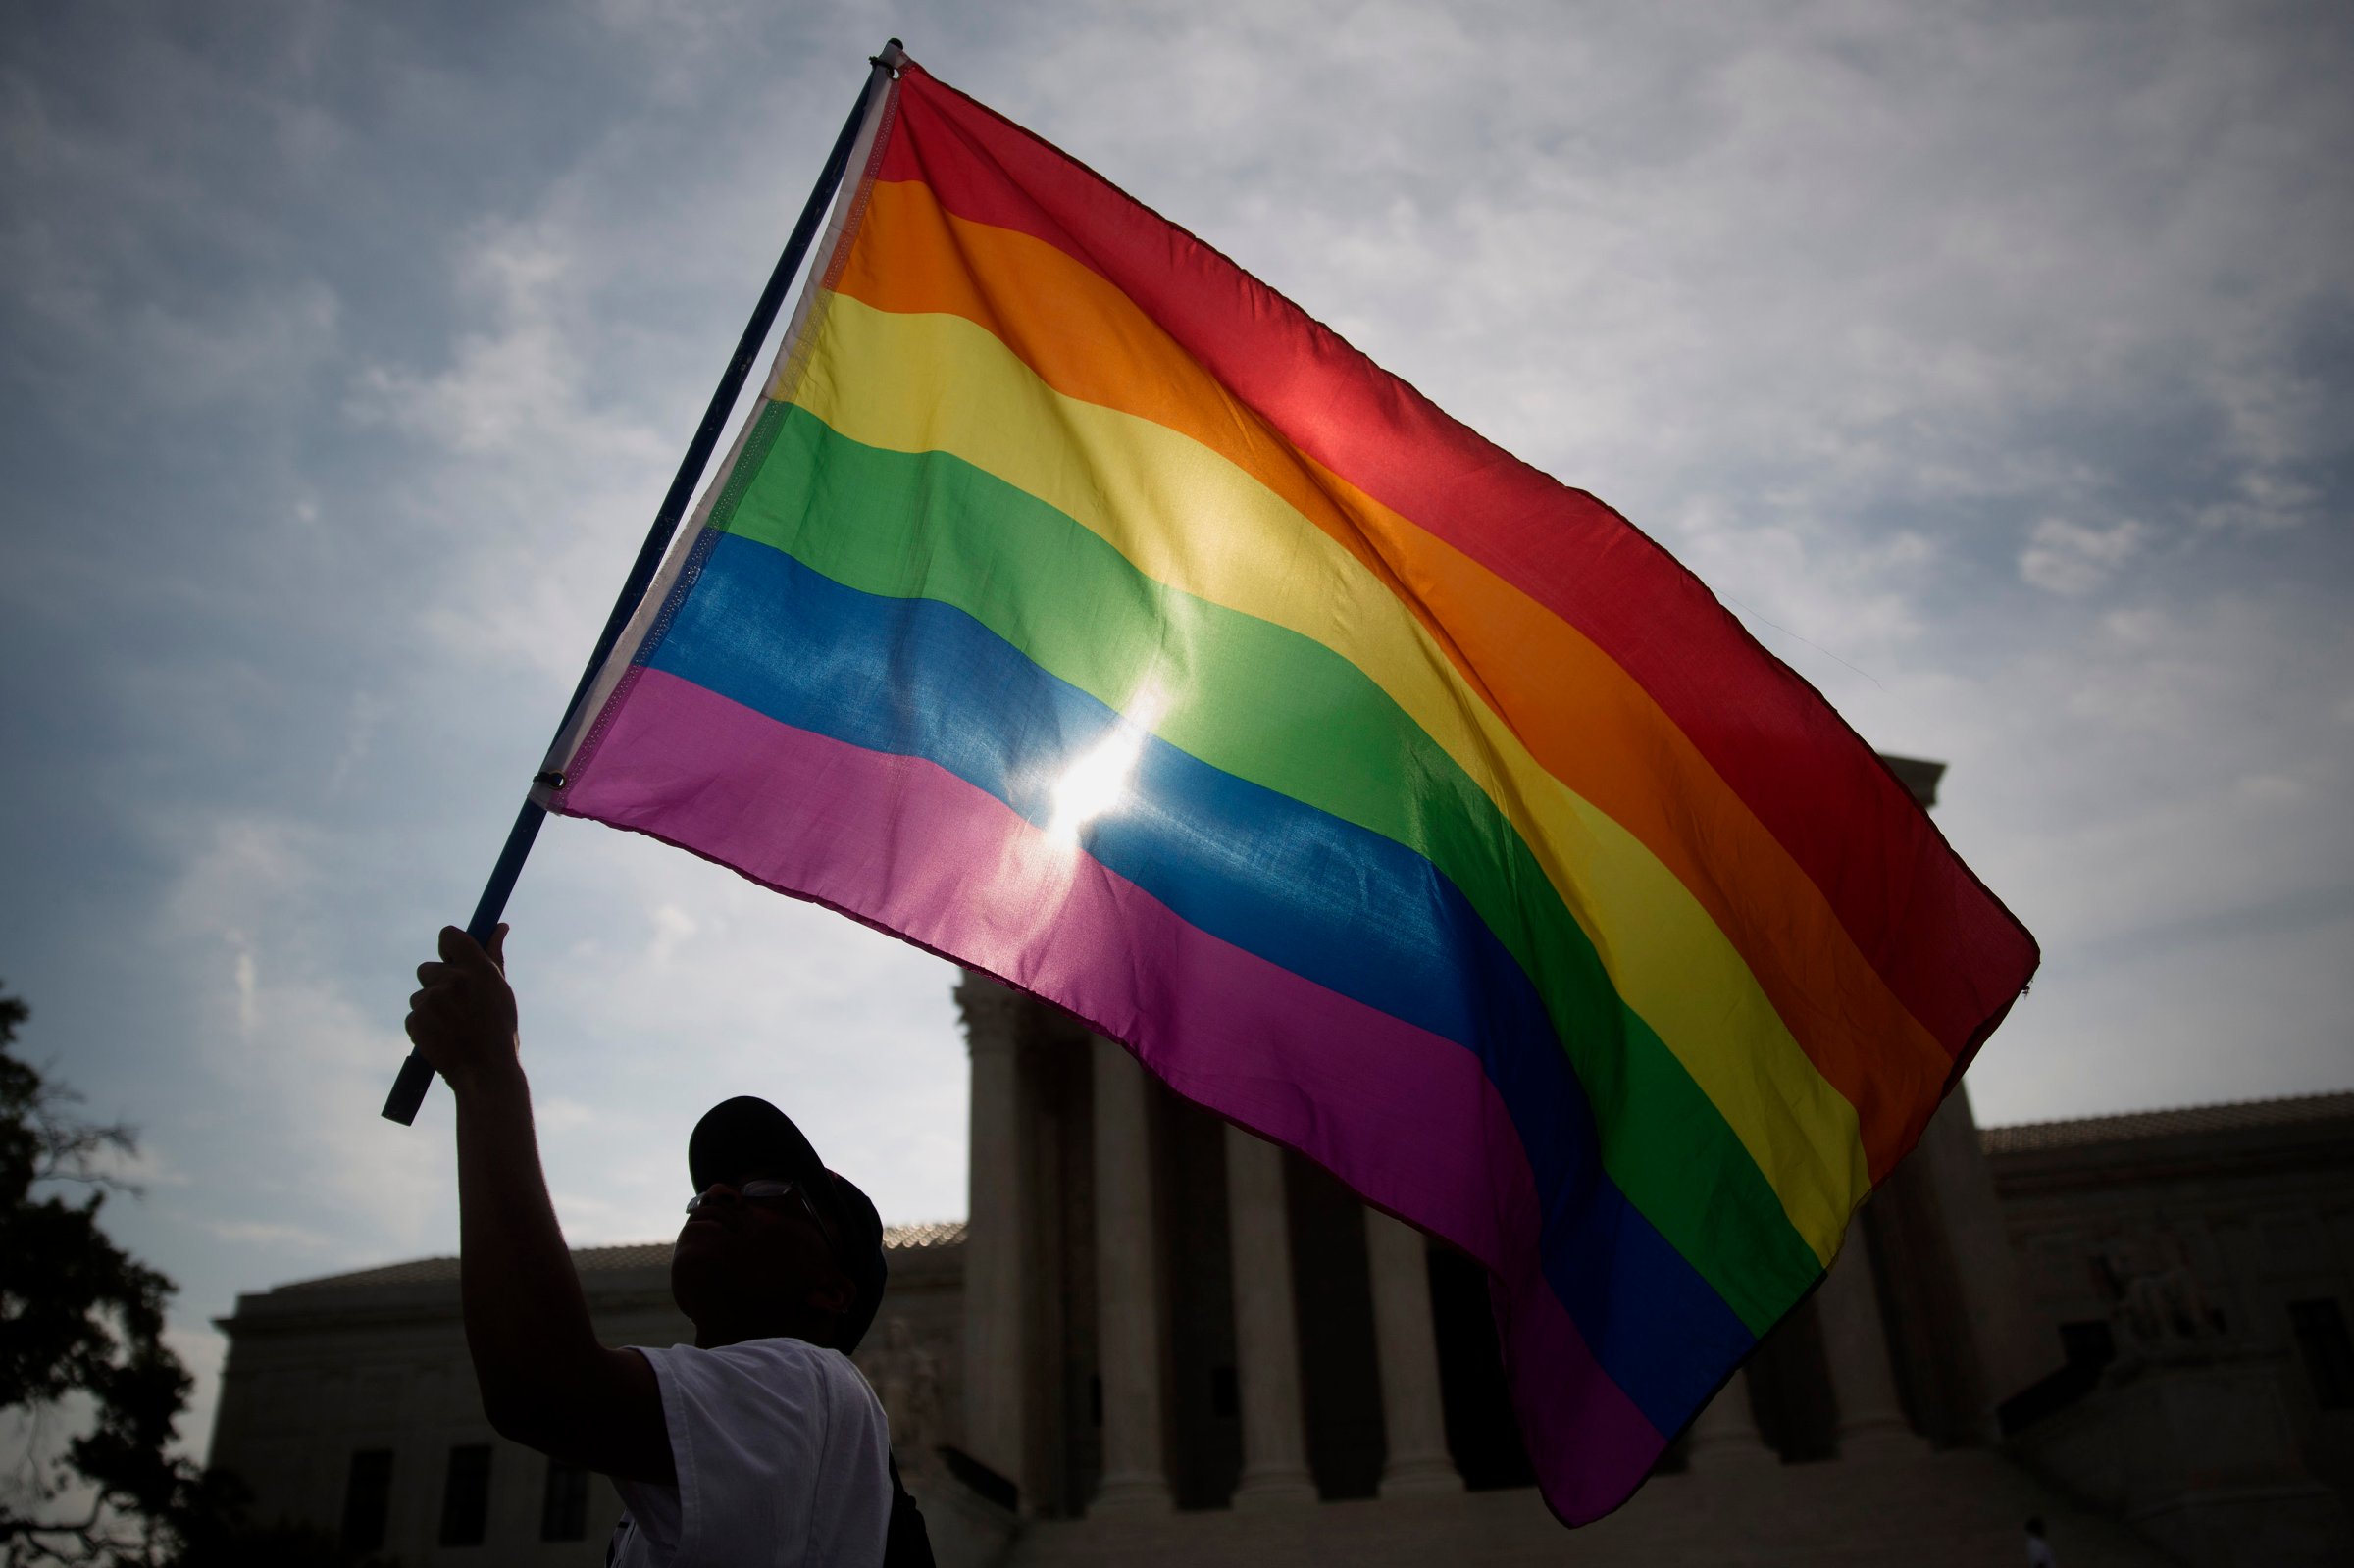 Carlos McKnight, from Washington, D.C., waves a rainbow colored flag outside the U.S. Supreme Court in Washington, D.C., U.S., on Friday, June 26, 2015.